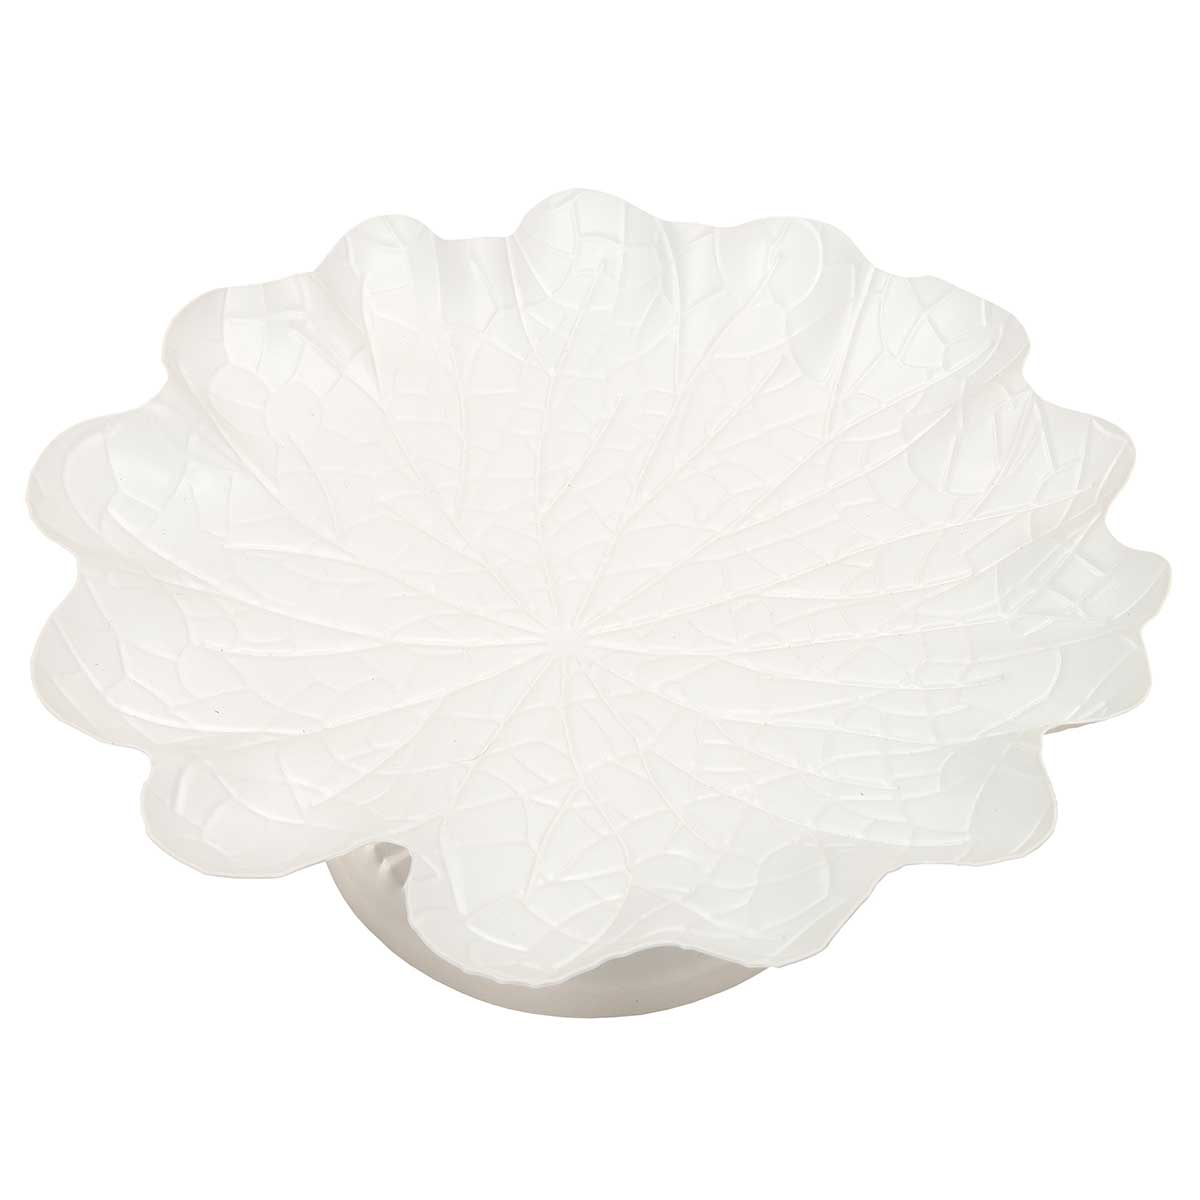 DISPLAY TRAY WATERLILY 10IN X 4IN MATTE WHITE METAL